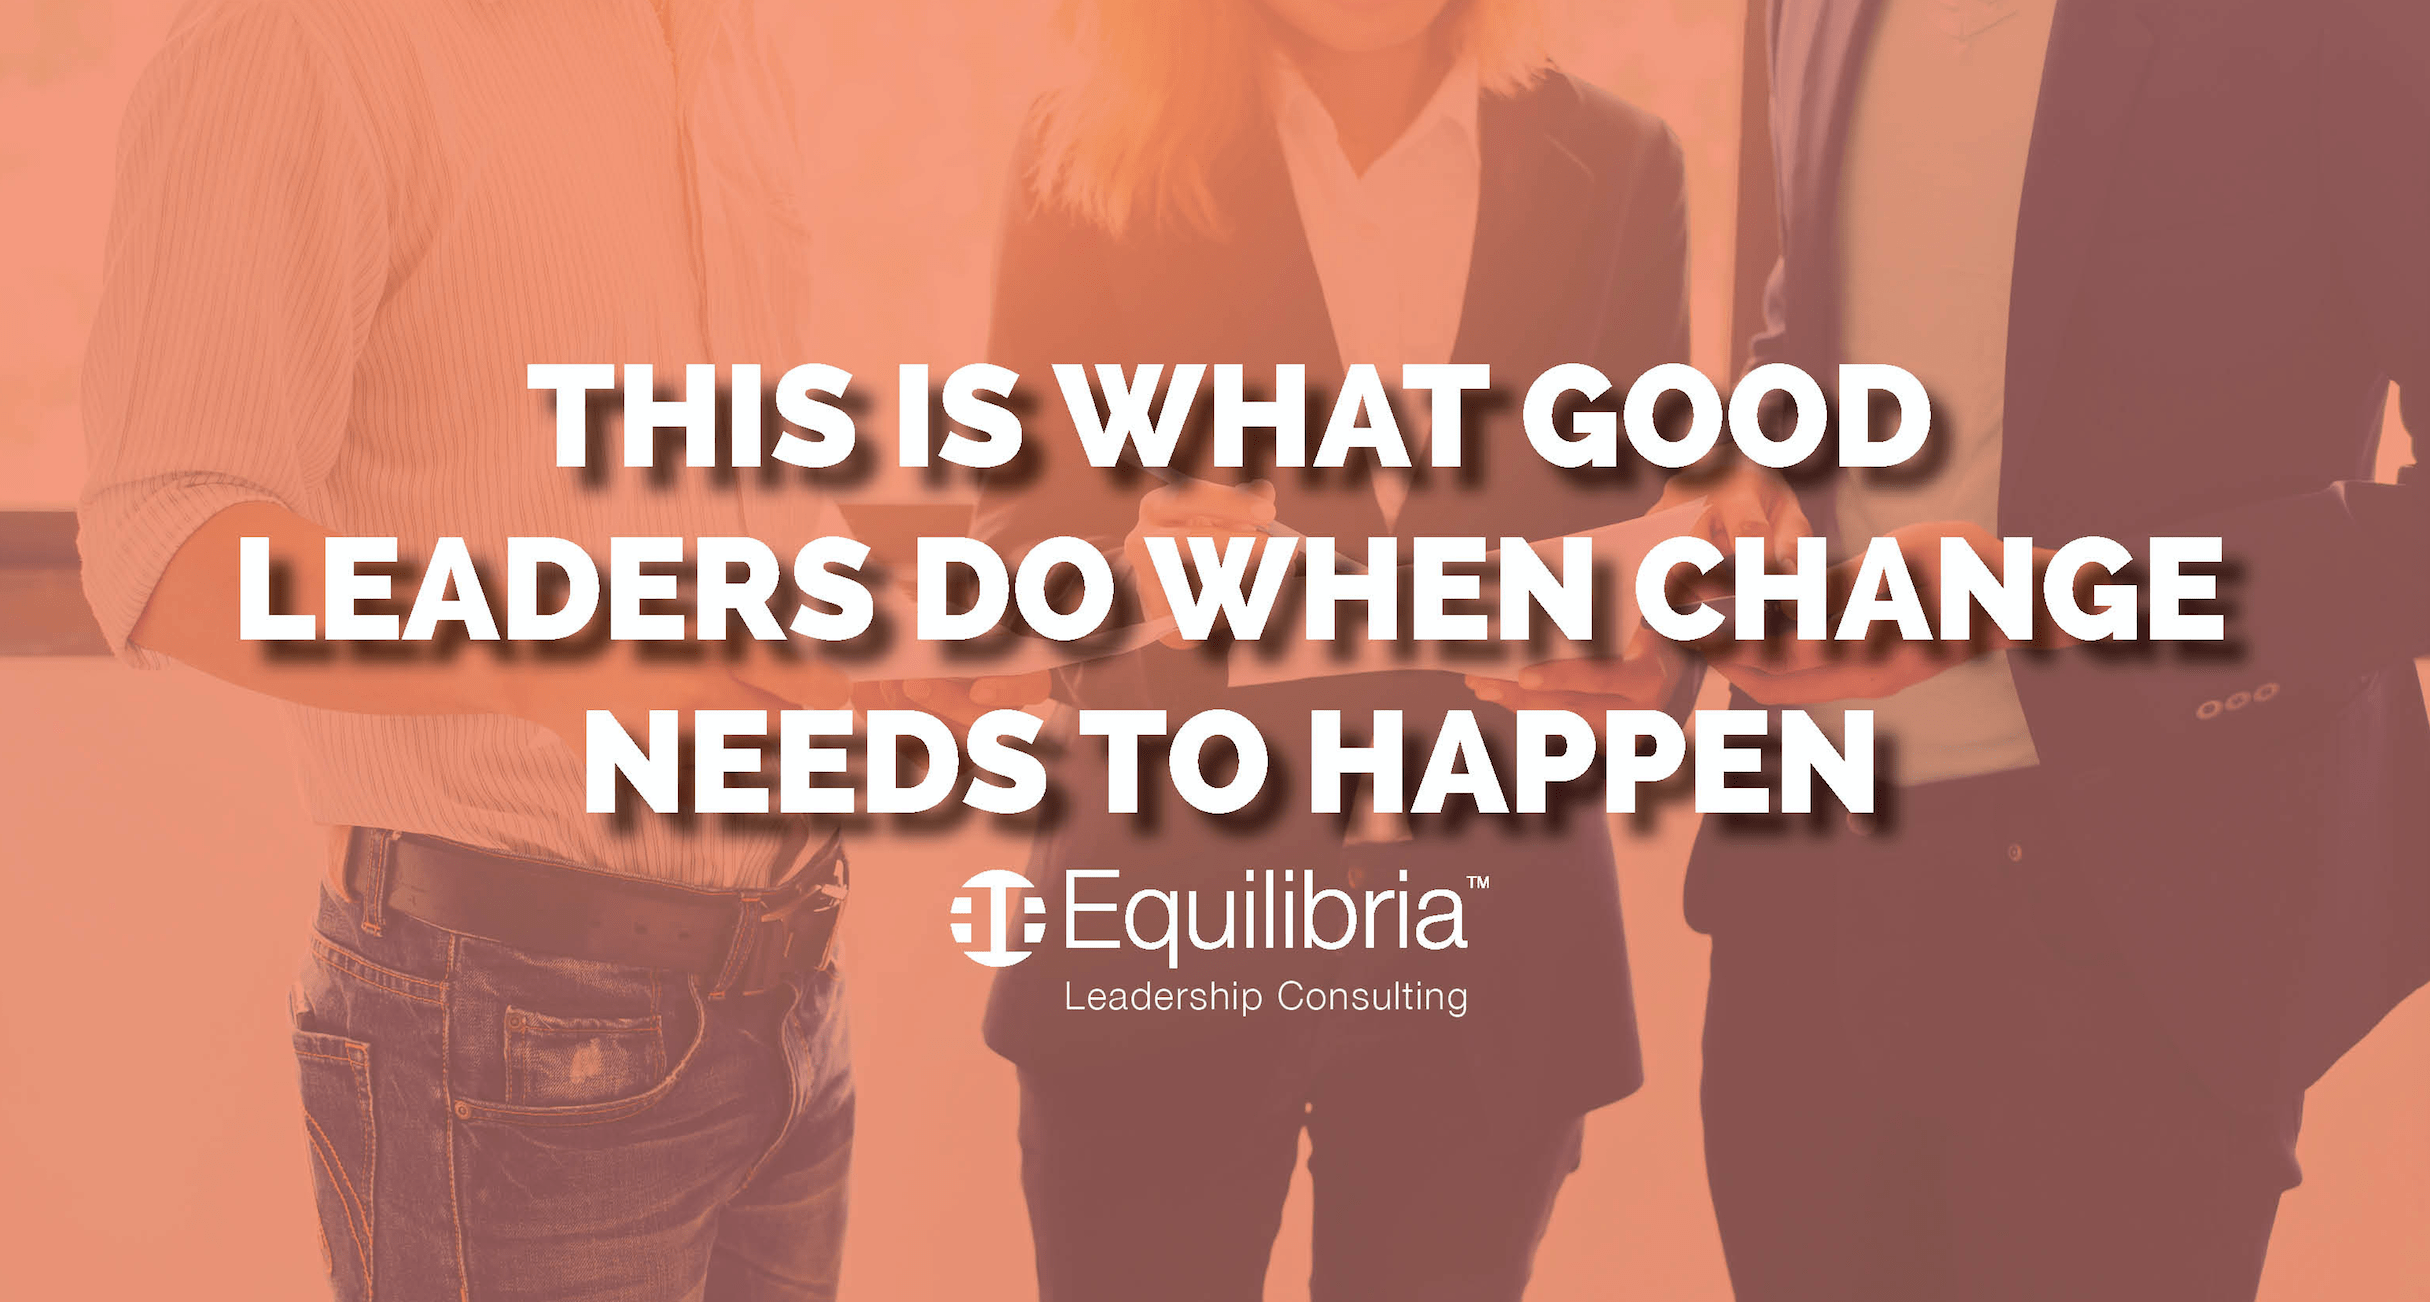 This is What Good Leaders Do When Change Needs to Happen